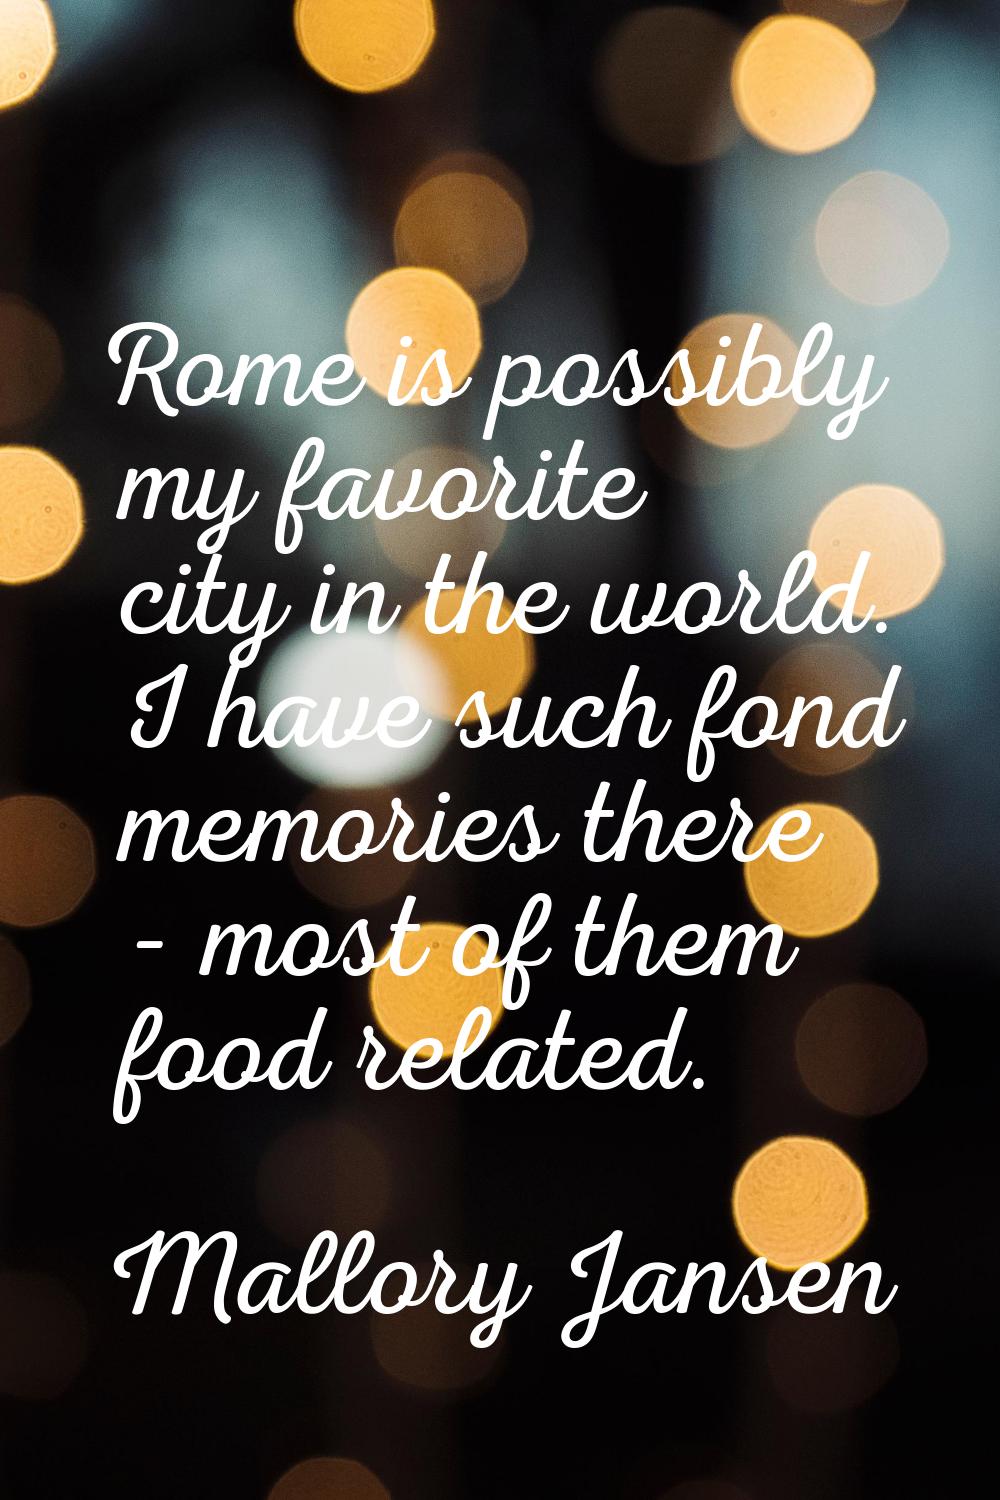 Rome is possibly my favorite city in the world. I have such fond memories there - most of them food